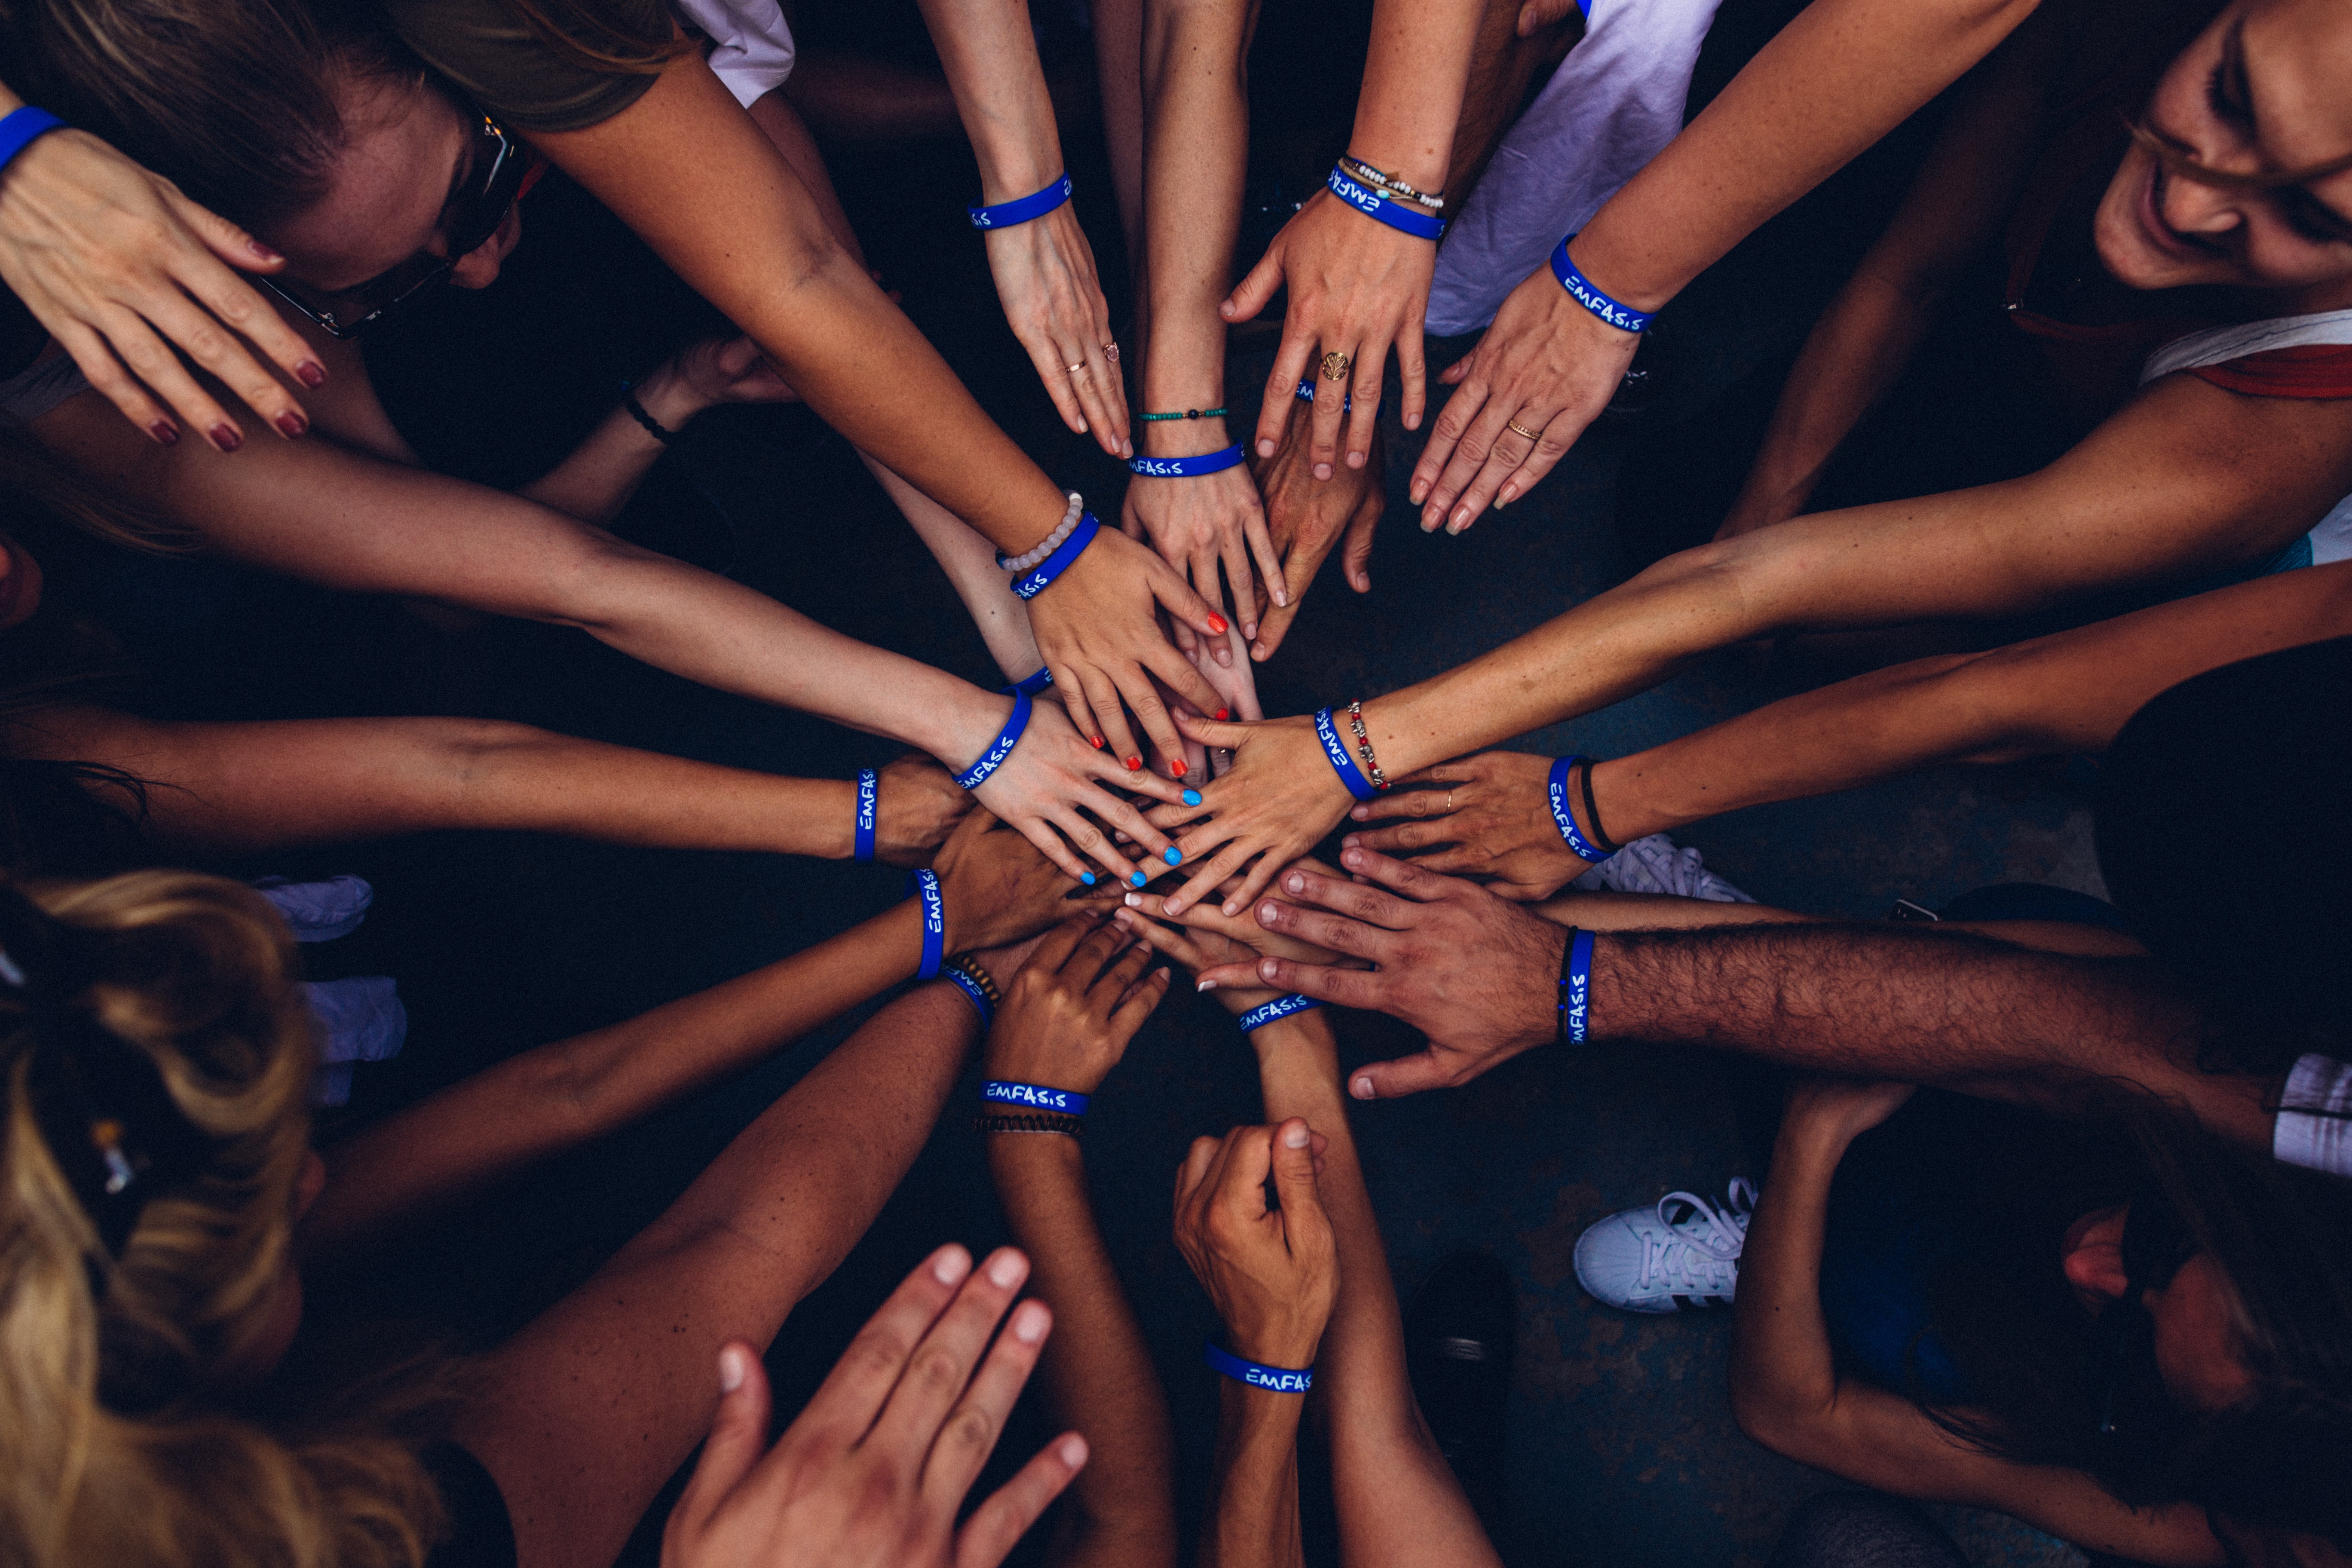 Group putting their hands in a circle